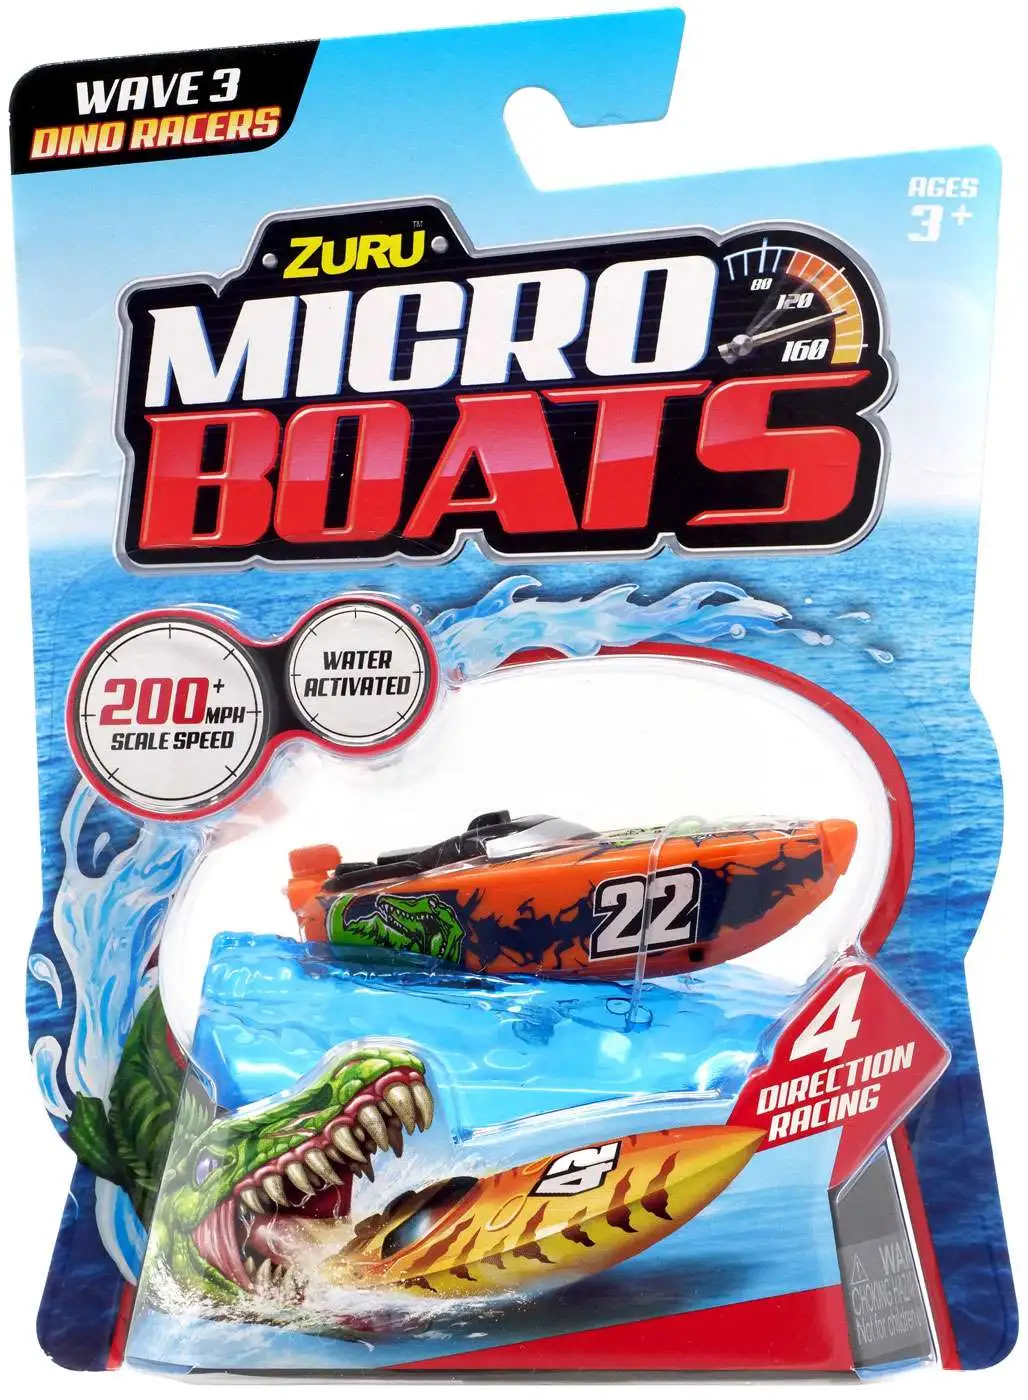 2 Pack Self-Steering Micro Toy Boat 25306 Multicolor Micro Boats Wave 3 Dino Racers Series 3 by ZURU Fully Motorized 